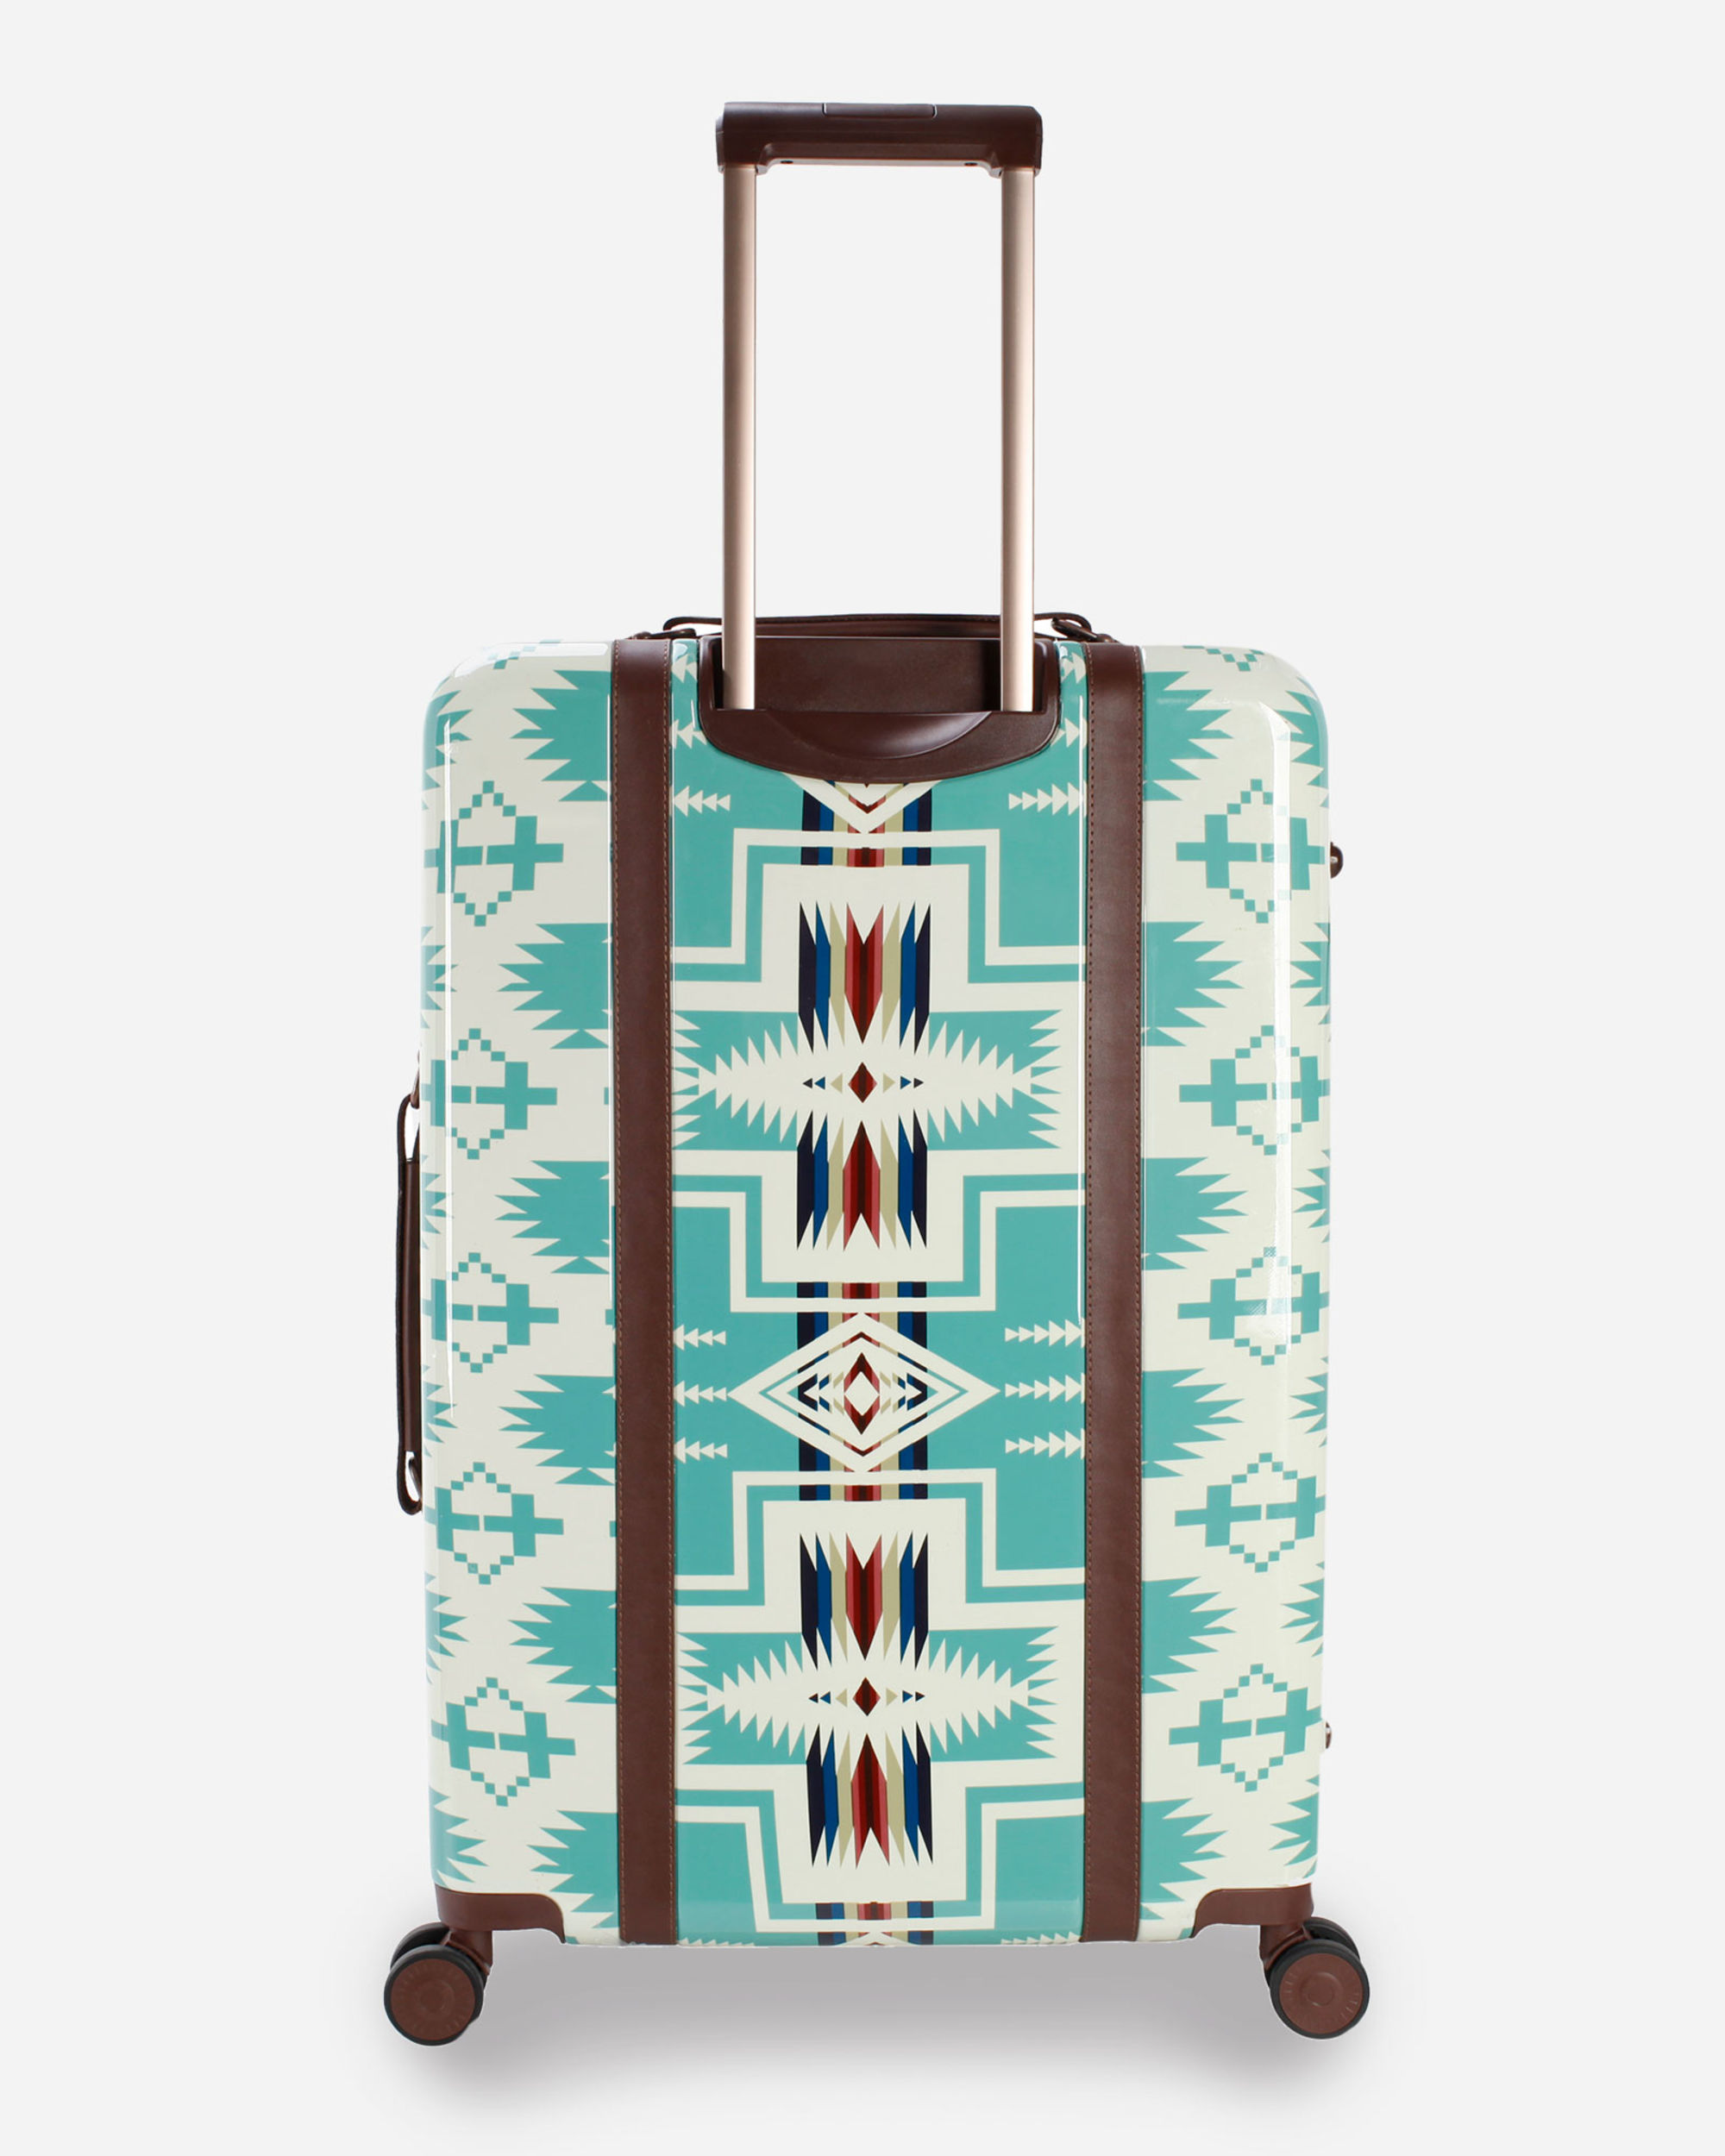 Wholesale Wholesale Price Travel Bag Luggage Colorful Colors Suitcase  Carry-On Type Luggage Upright From m.